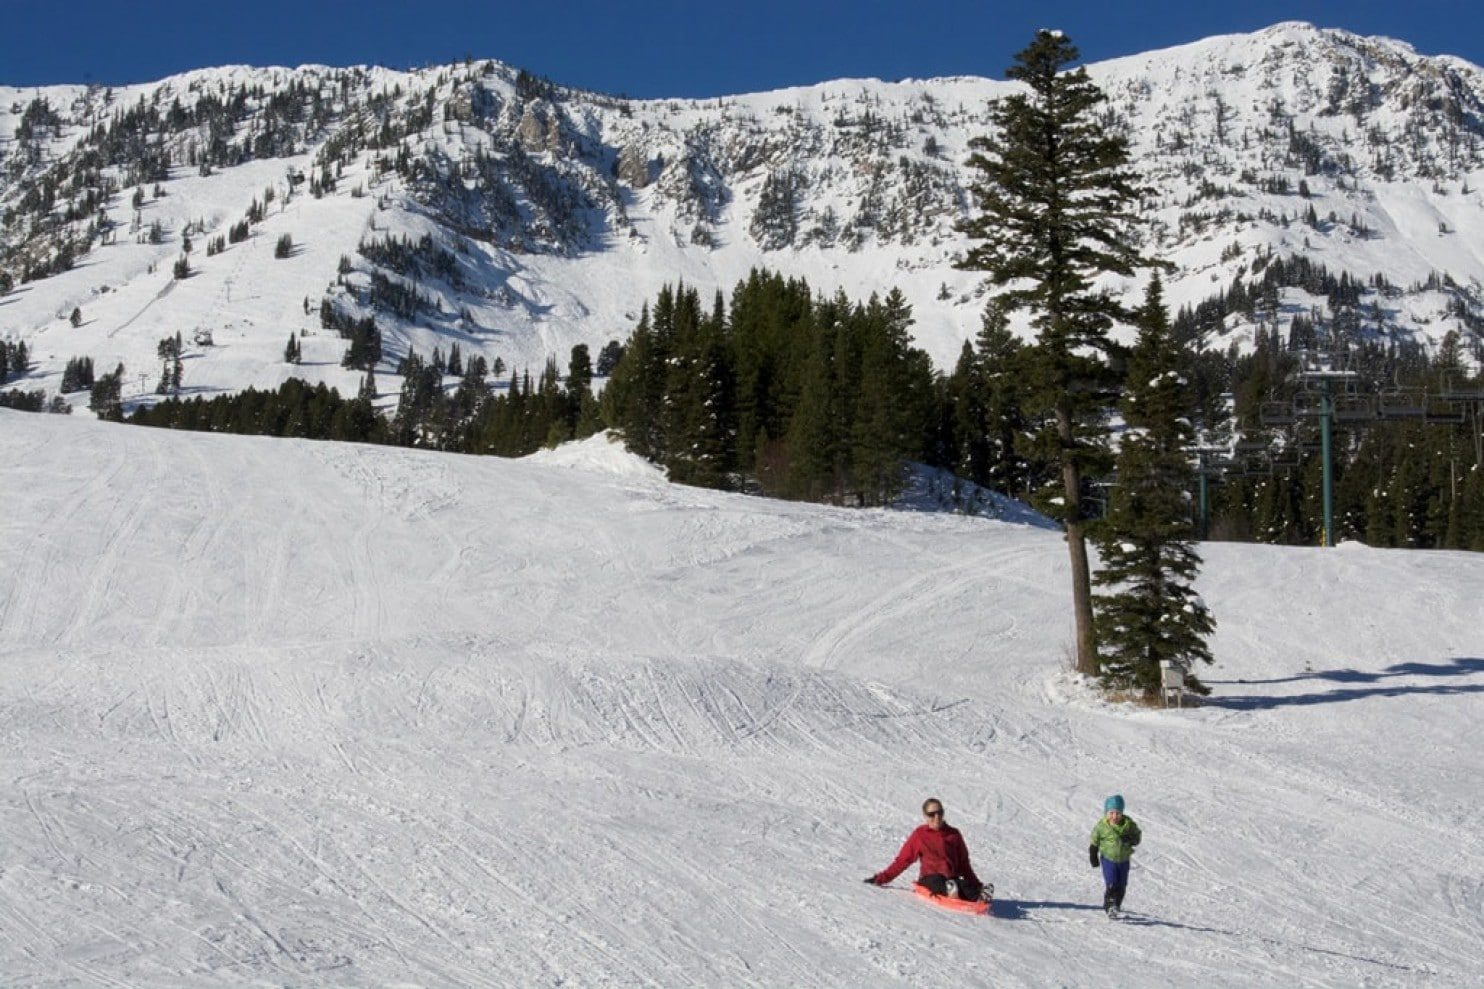 Midwinter conditions in November at Bridger Bowl ski area in southwest Montana on Monday.